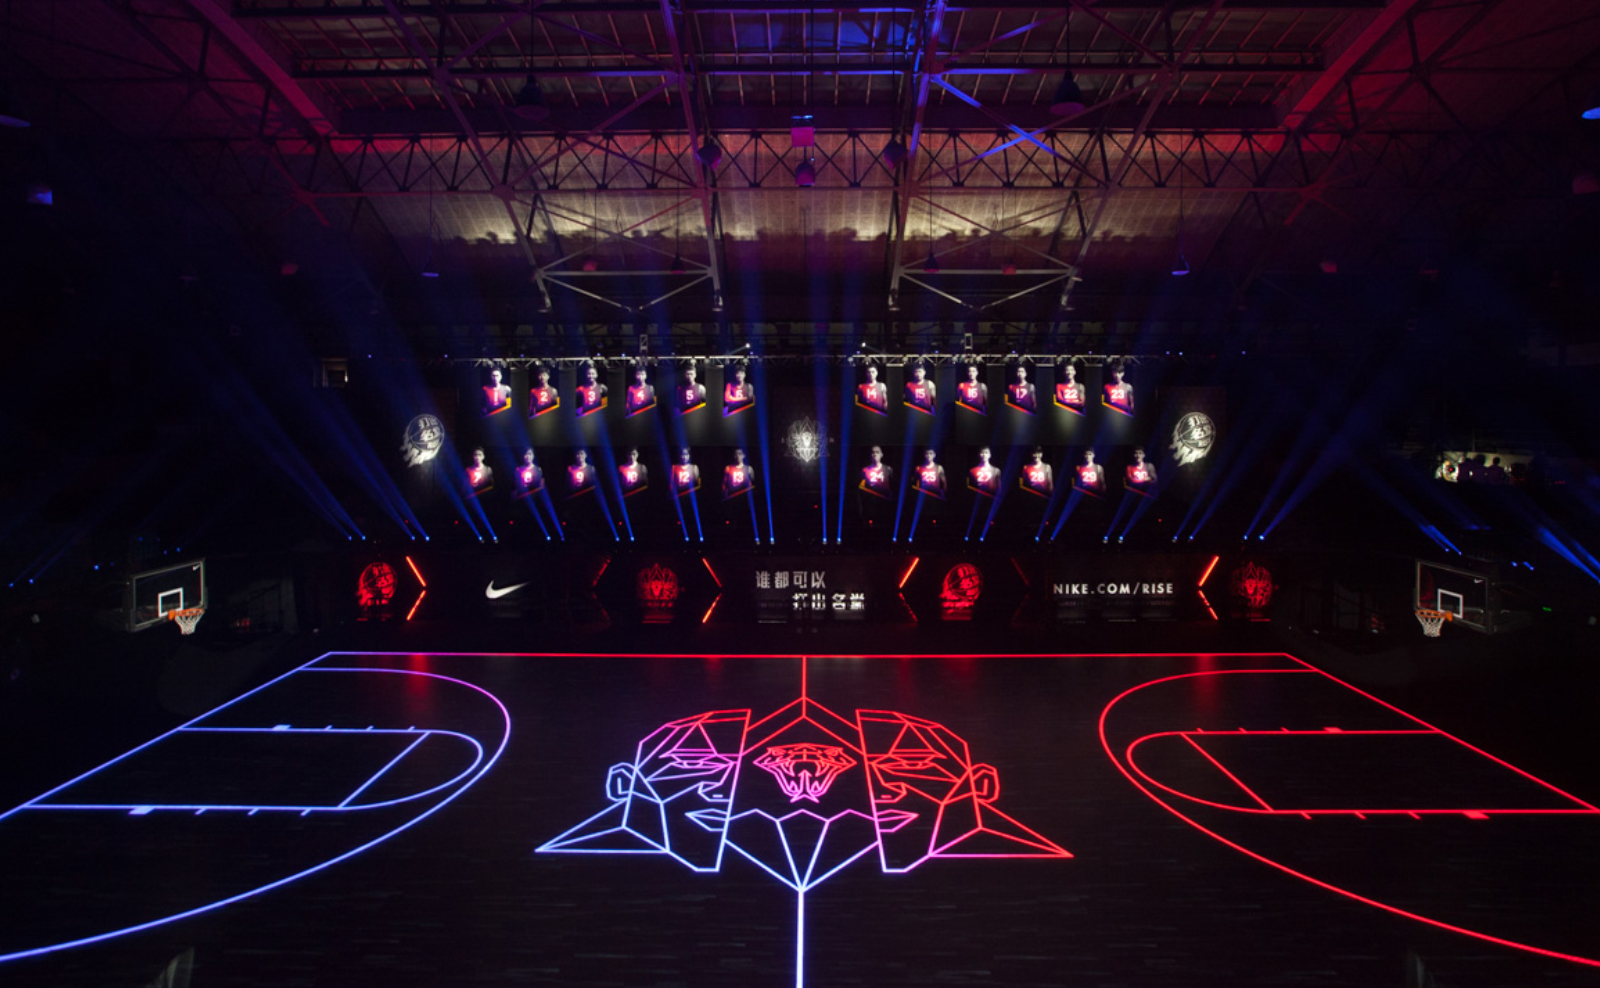 Nike Rise 2.0 Digital Basketball Training Court Combines Experiential  Design with Advanced Tracking - Fitness Gaming